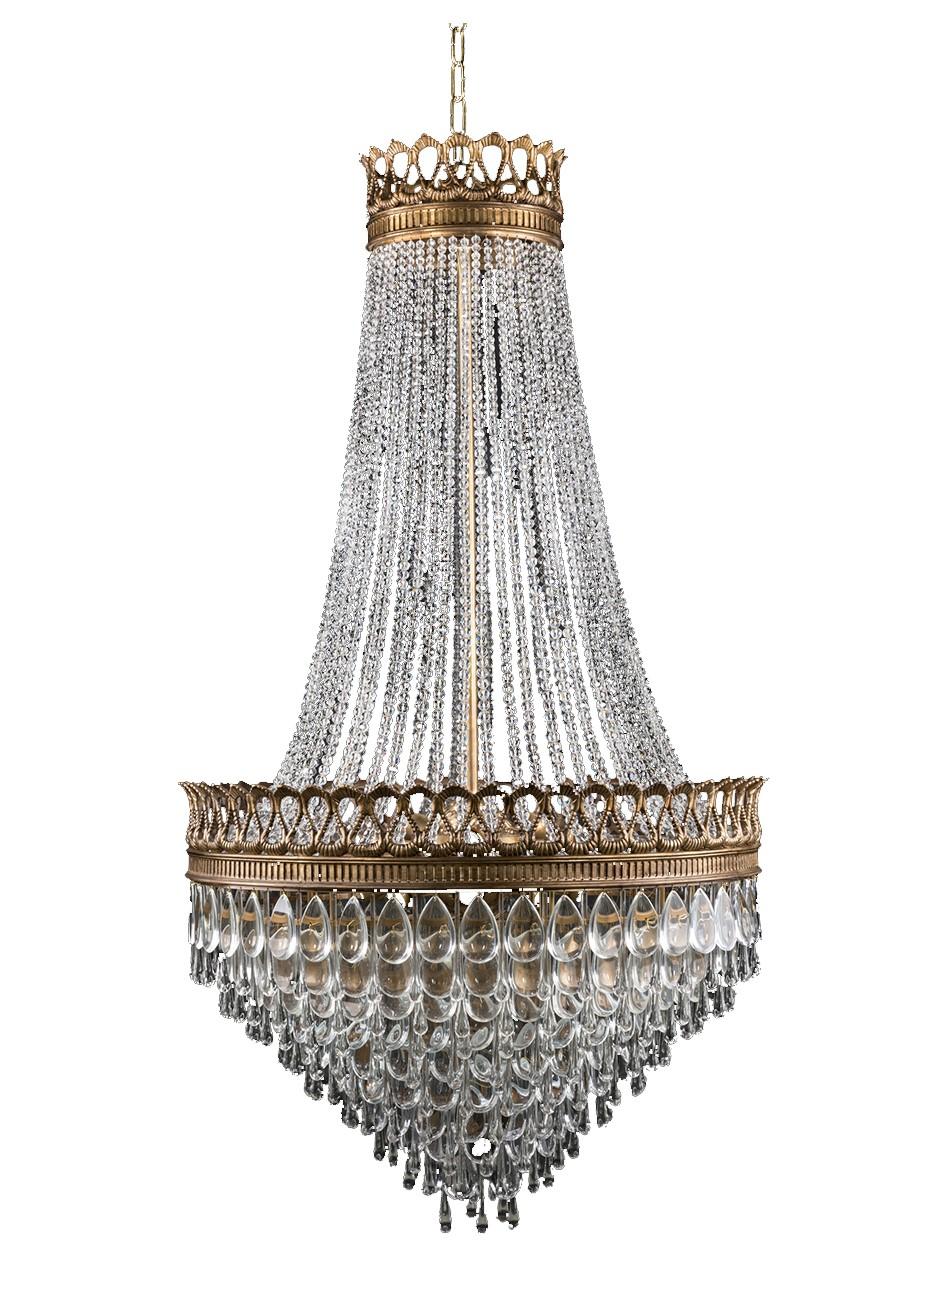 Shining with understated simplicity, this iconic chandelier is characterized by Classic sophistication and elegance. The sleek, balanced form is composed of strands of cascading crystals, elegantly curving to connect to an ornate brass ring lined